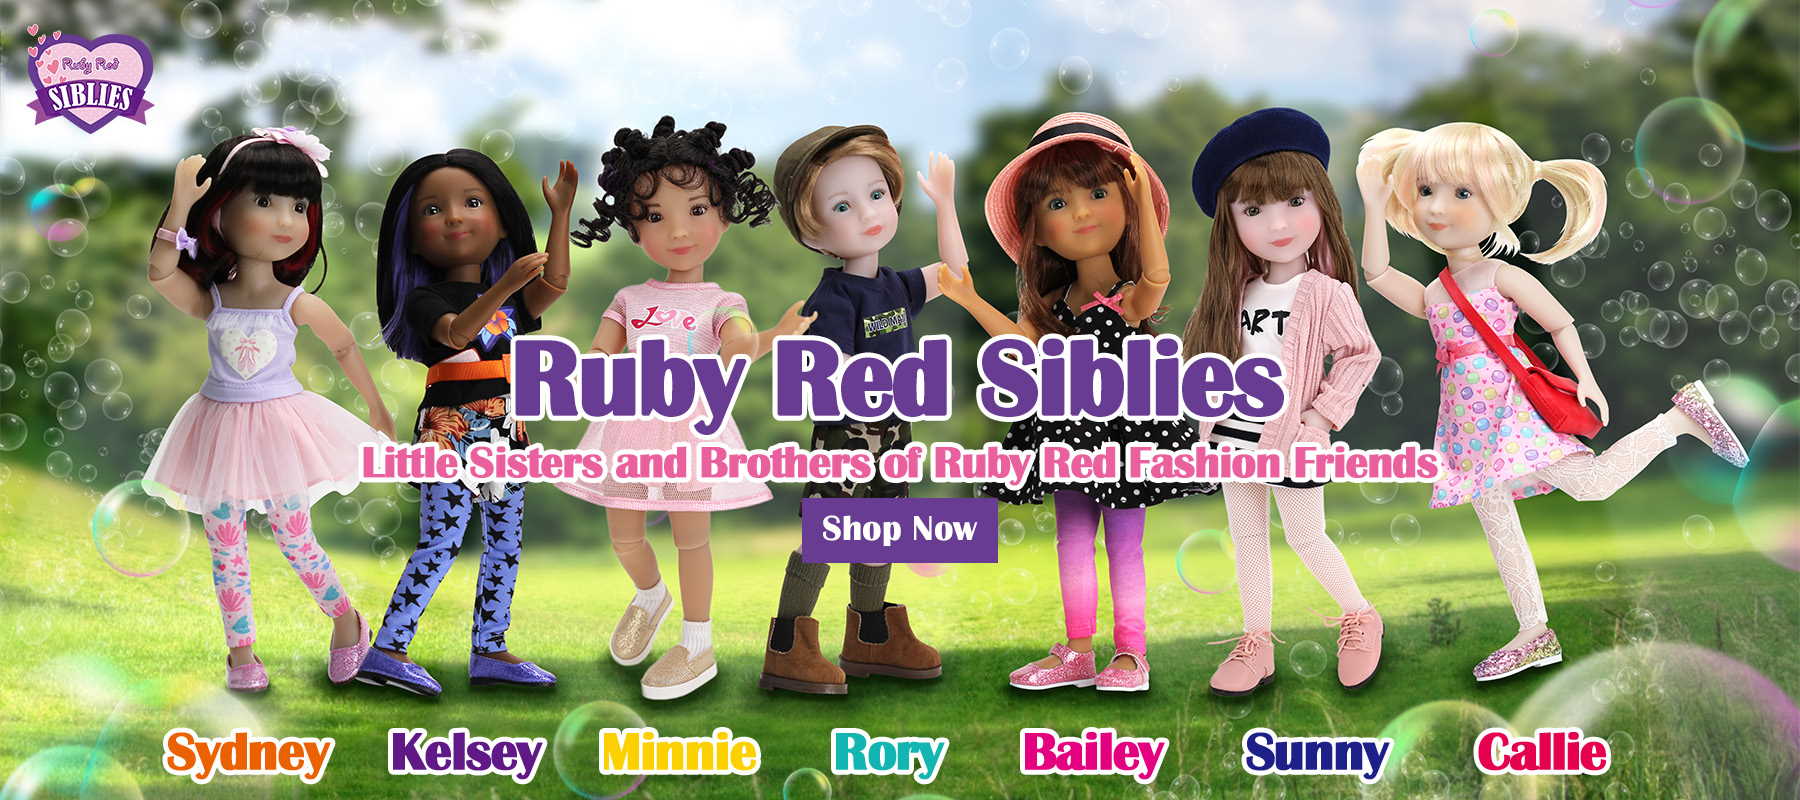 Collectible Dolls - Ruby Red Siblies